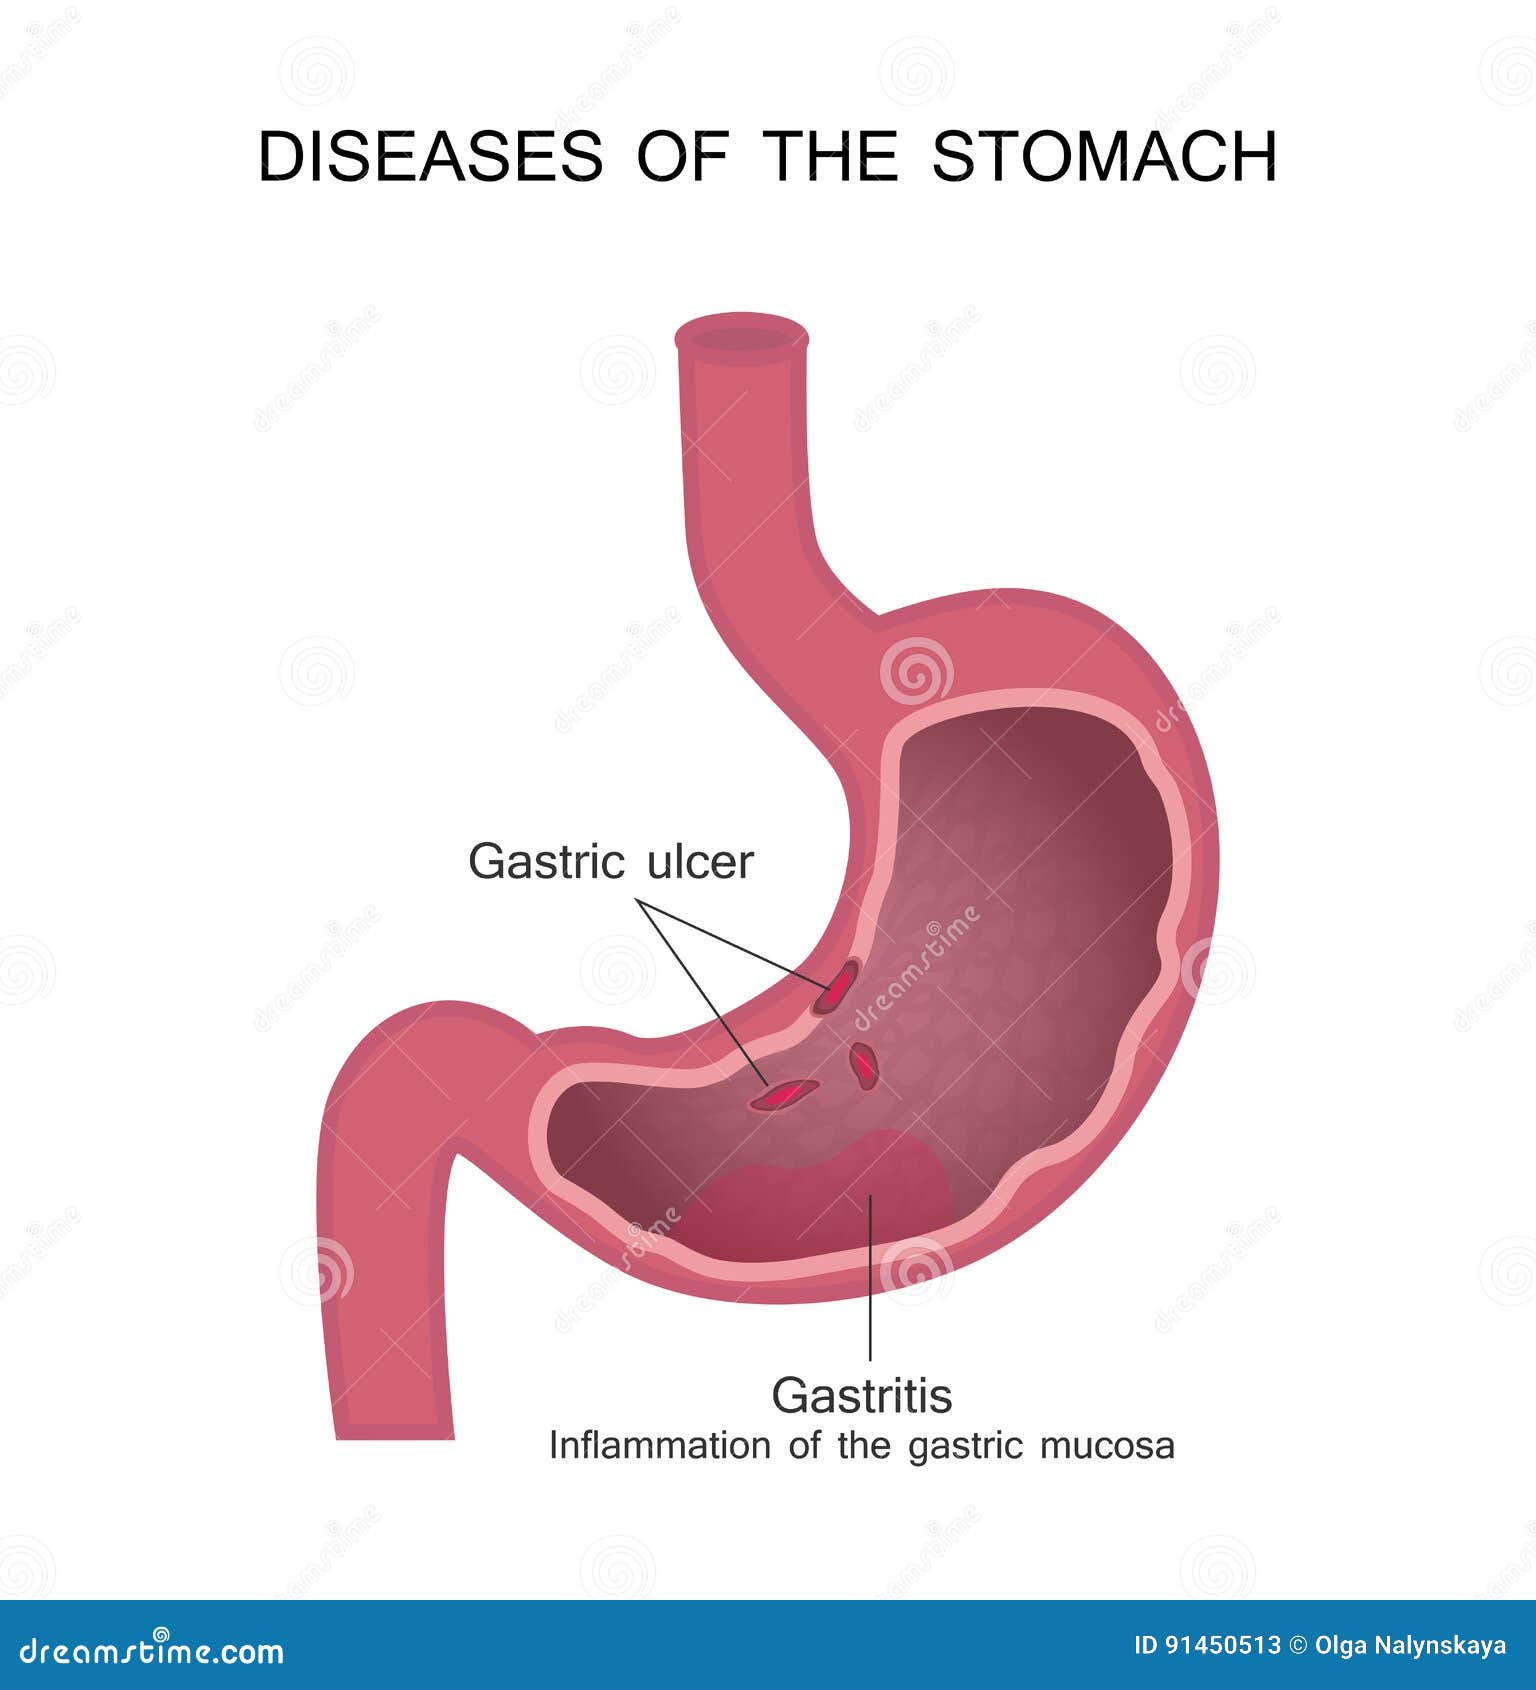 diseases of the stomach. peptic ulcer and gastritis.